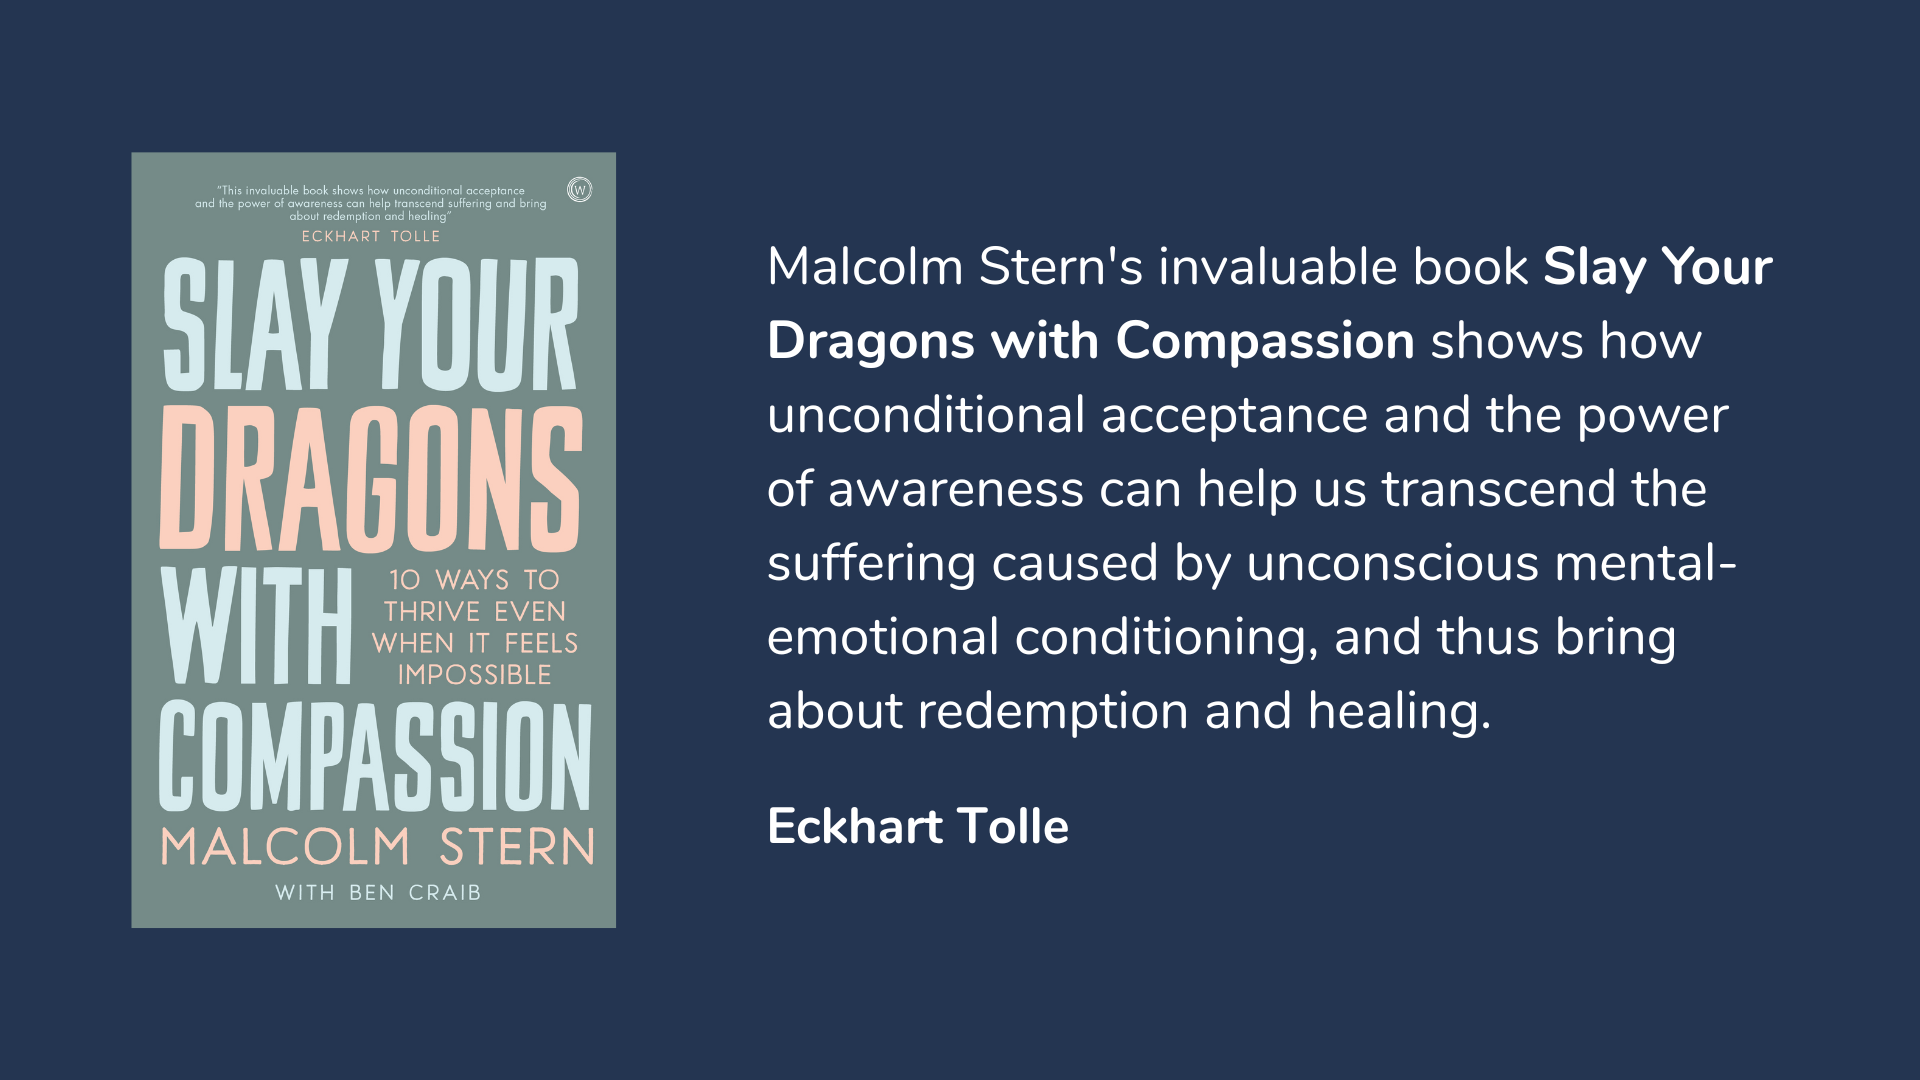 Slay Your Dragons With Compassion: Ten Ways To Thrive Even When It Feels Impossible, book cover and description.